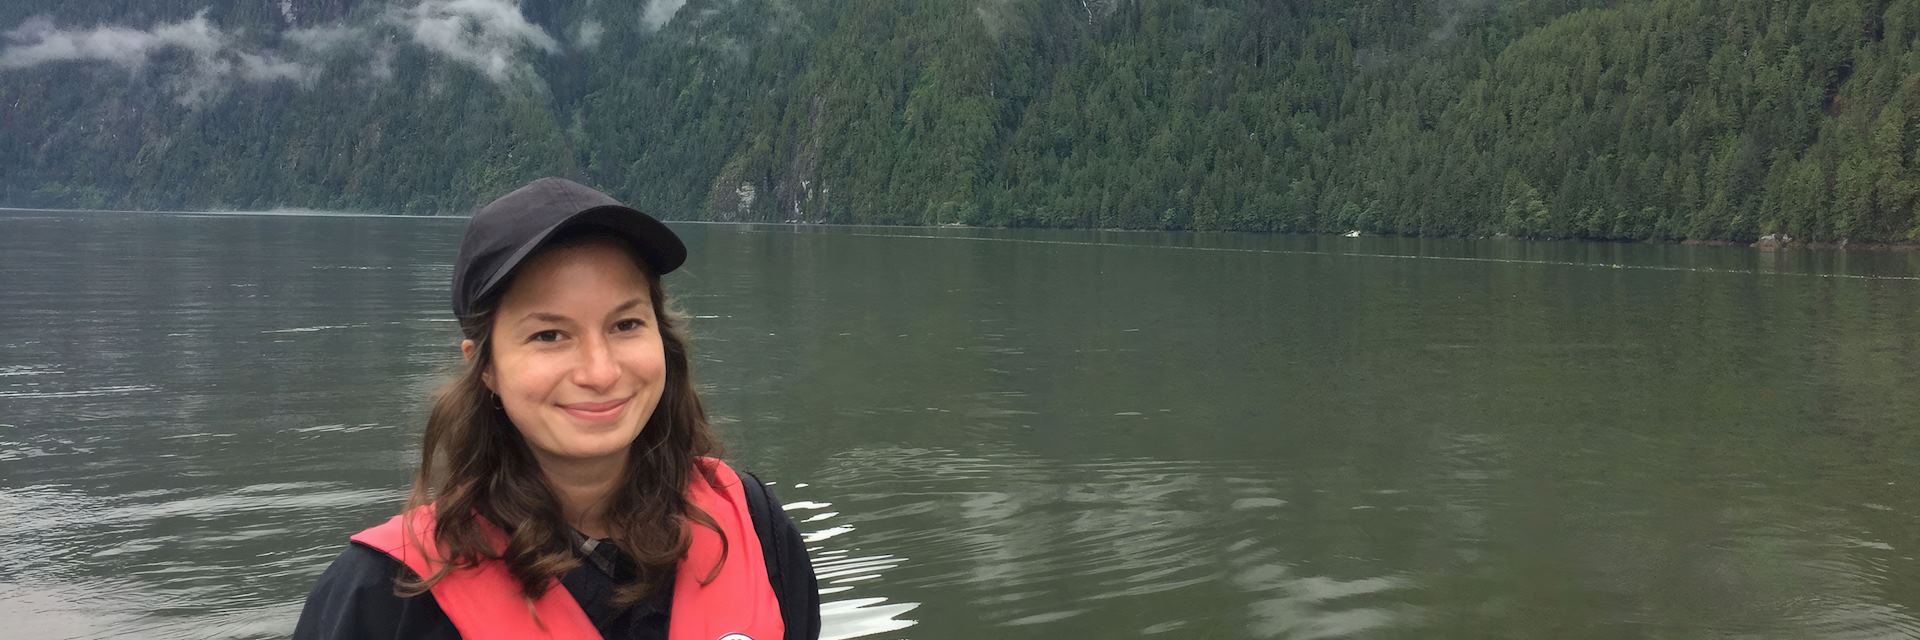 Emily at Spirit Bear Lodge in the Great Bear Rainforest, BC, Canada